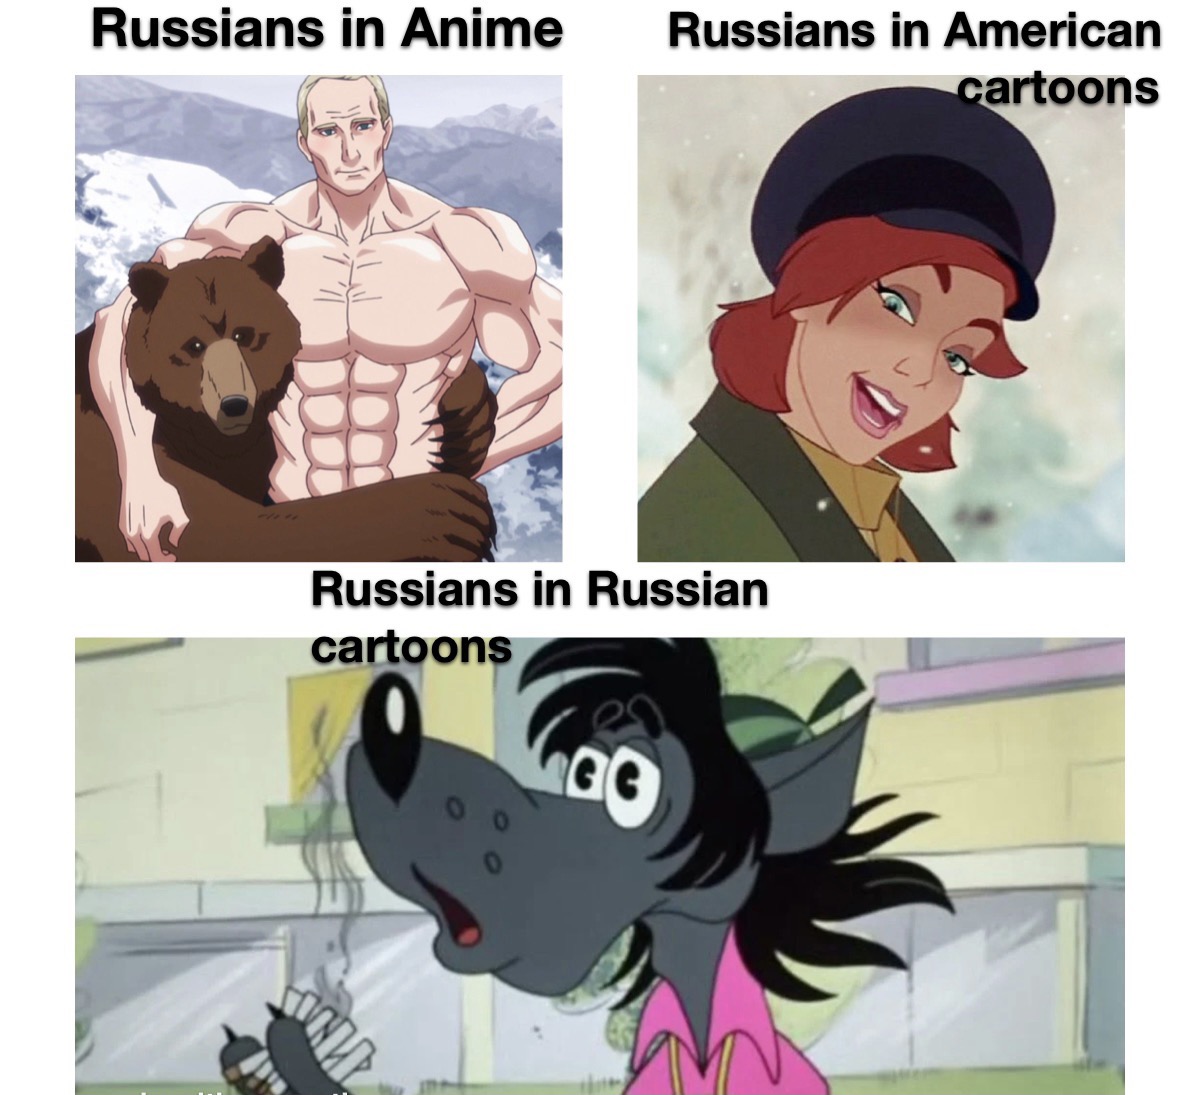 cartoon - Russians in Anime Russians in American cartoons Russians in Russian cartoons